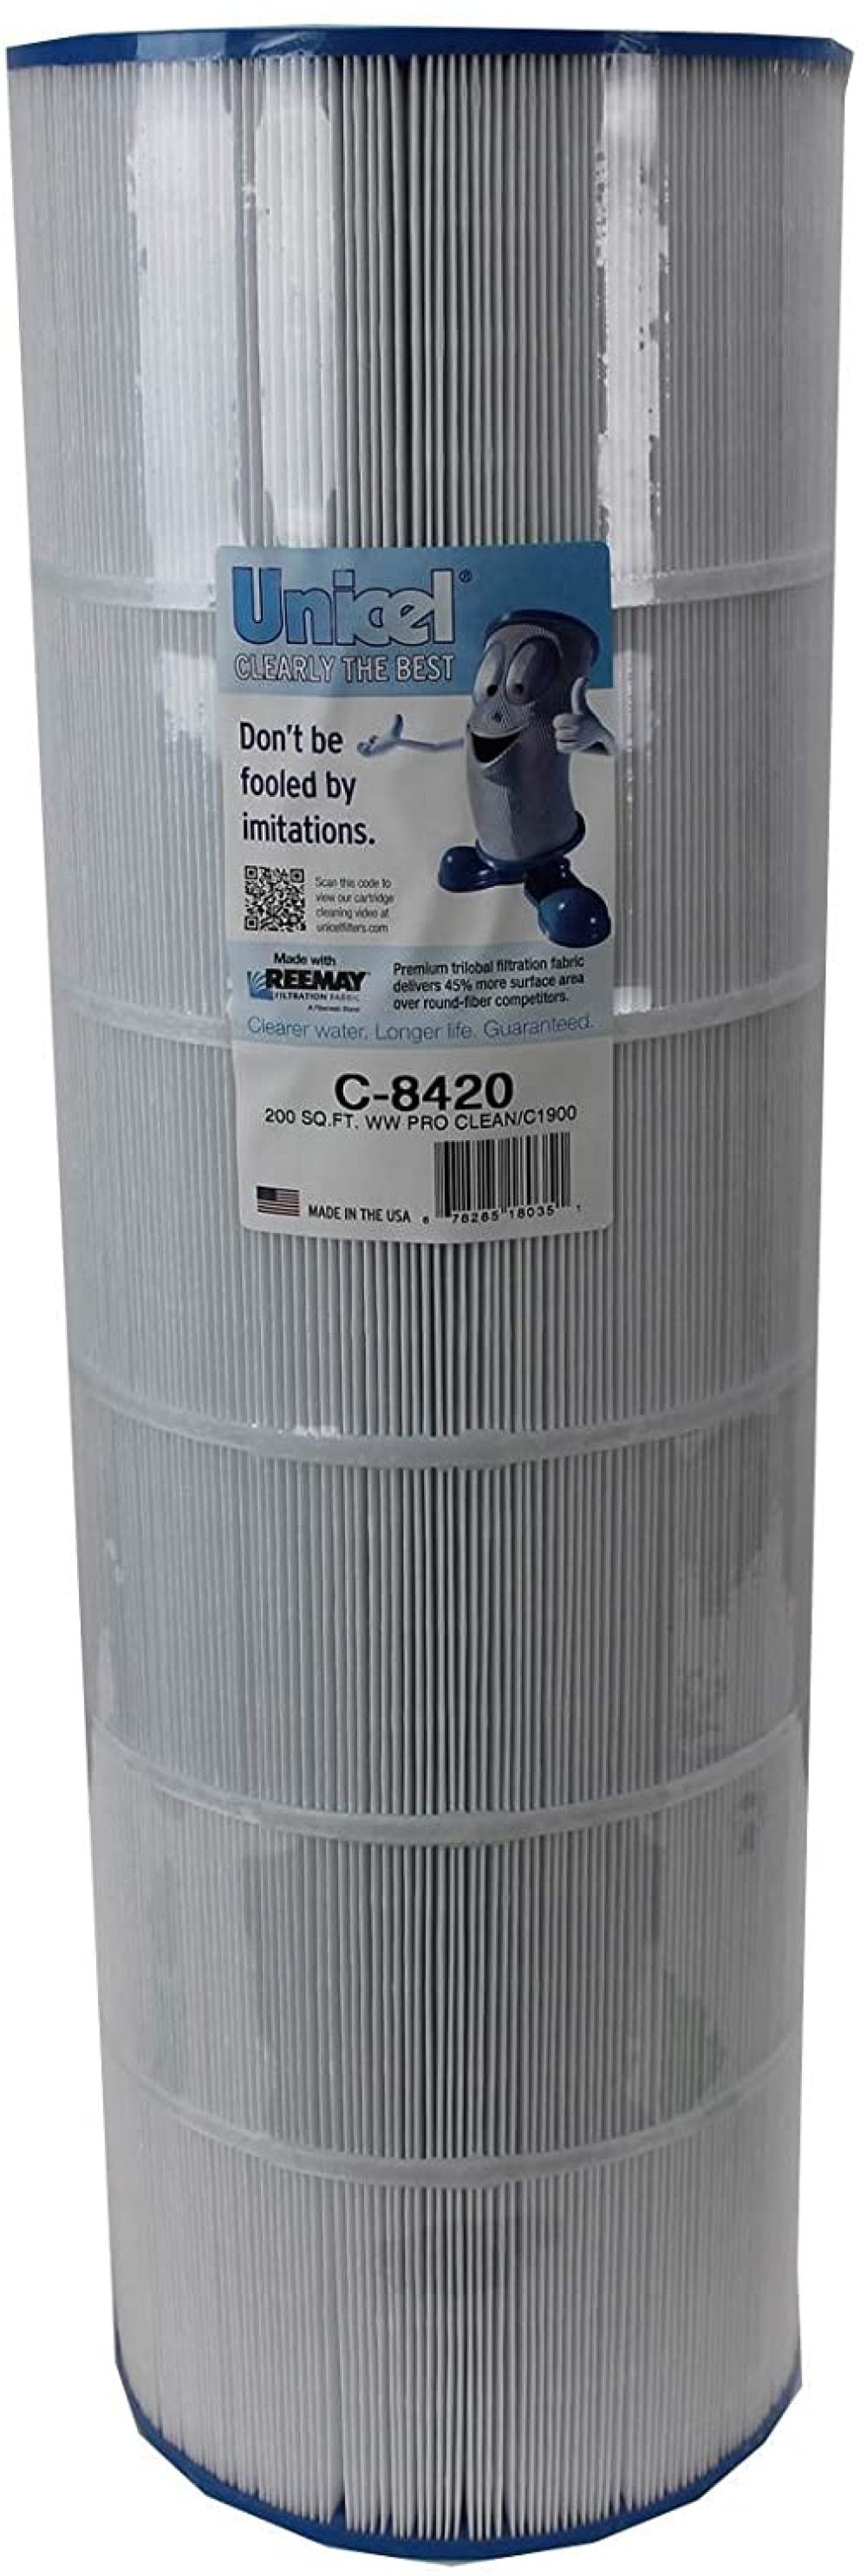 2 NEW Unicel C-8420 Spa Pool Replacement Cartridge Filters 200 Sq Ft Hayward 